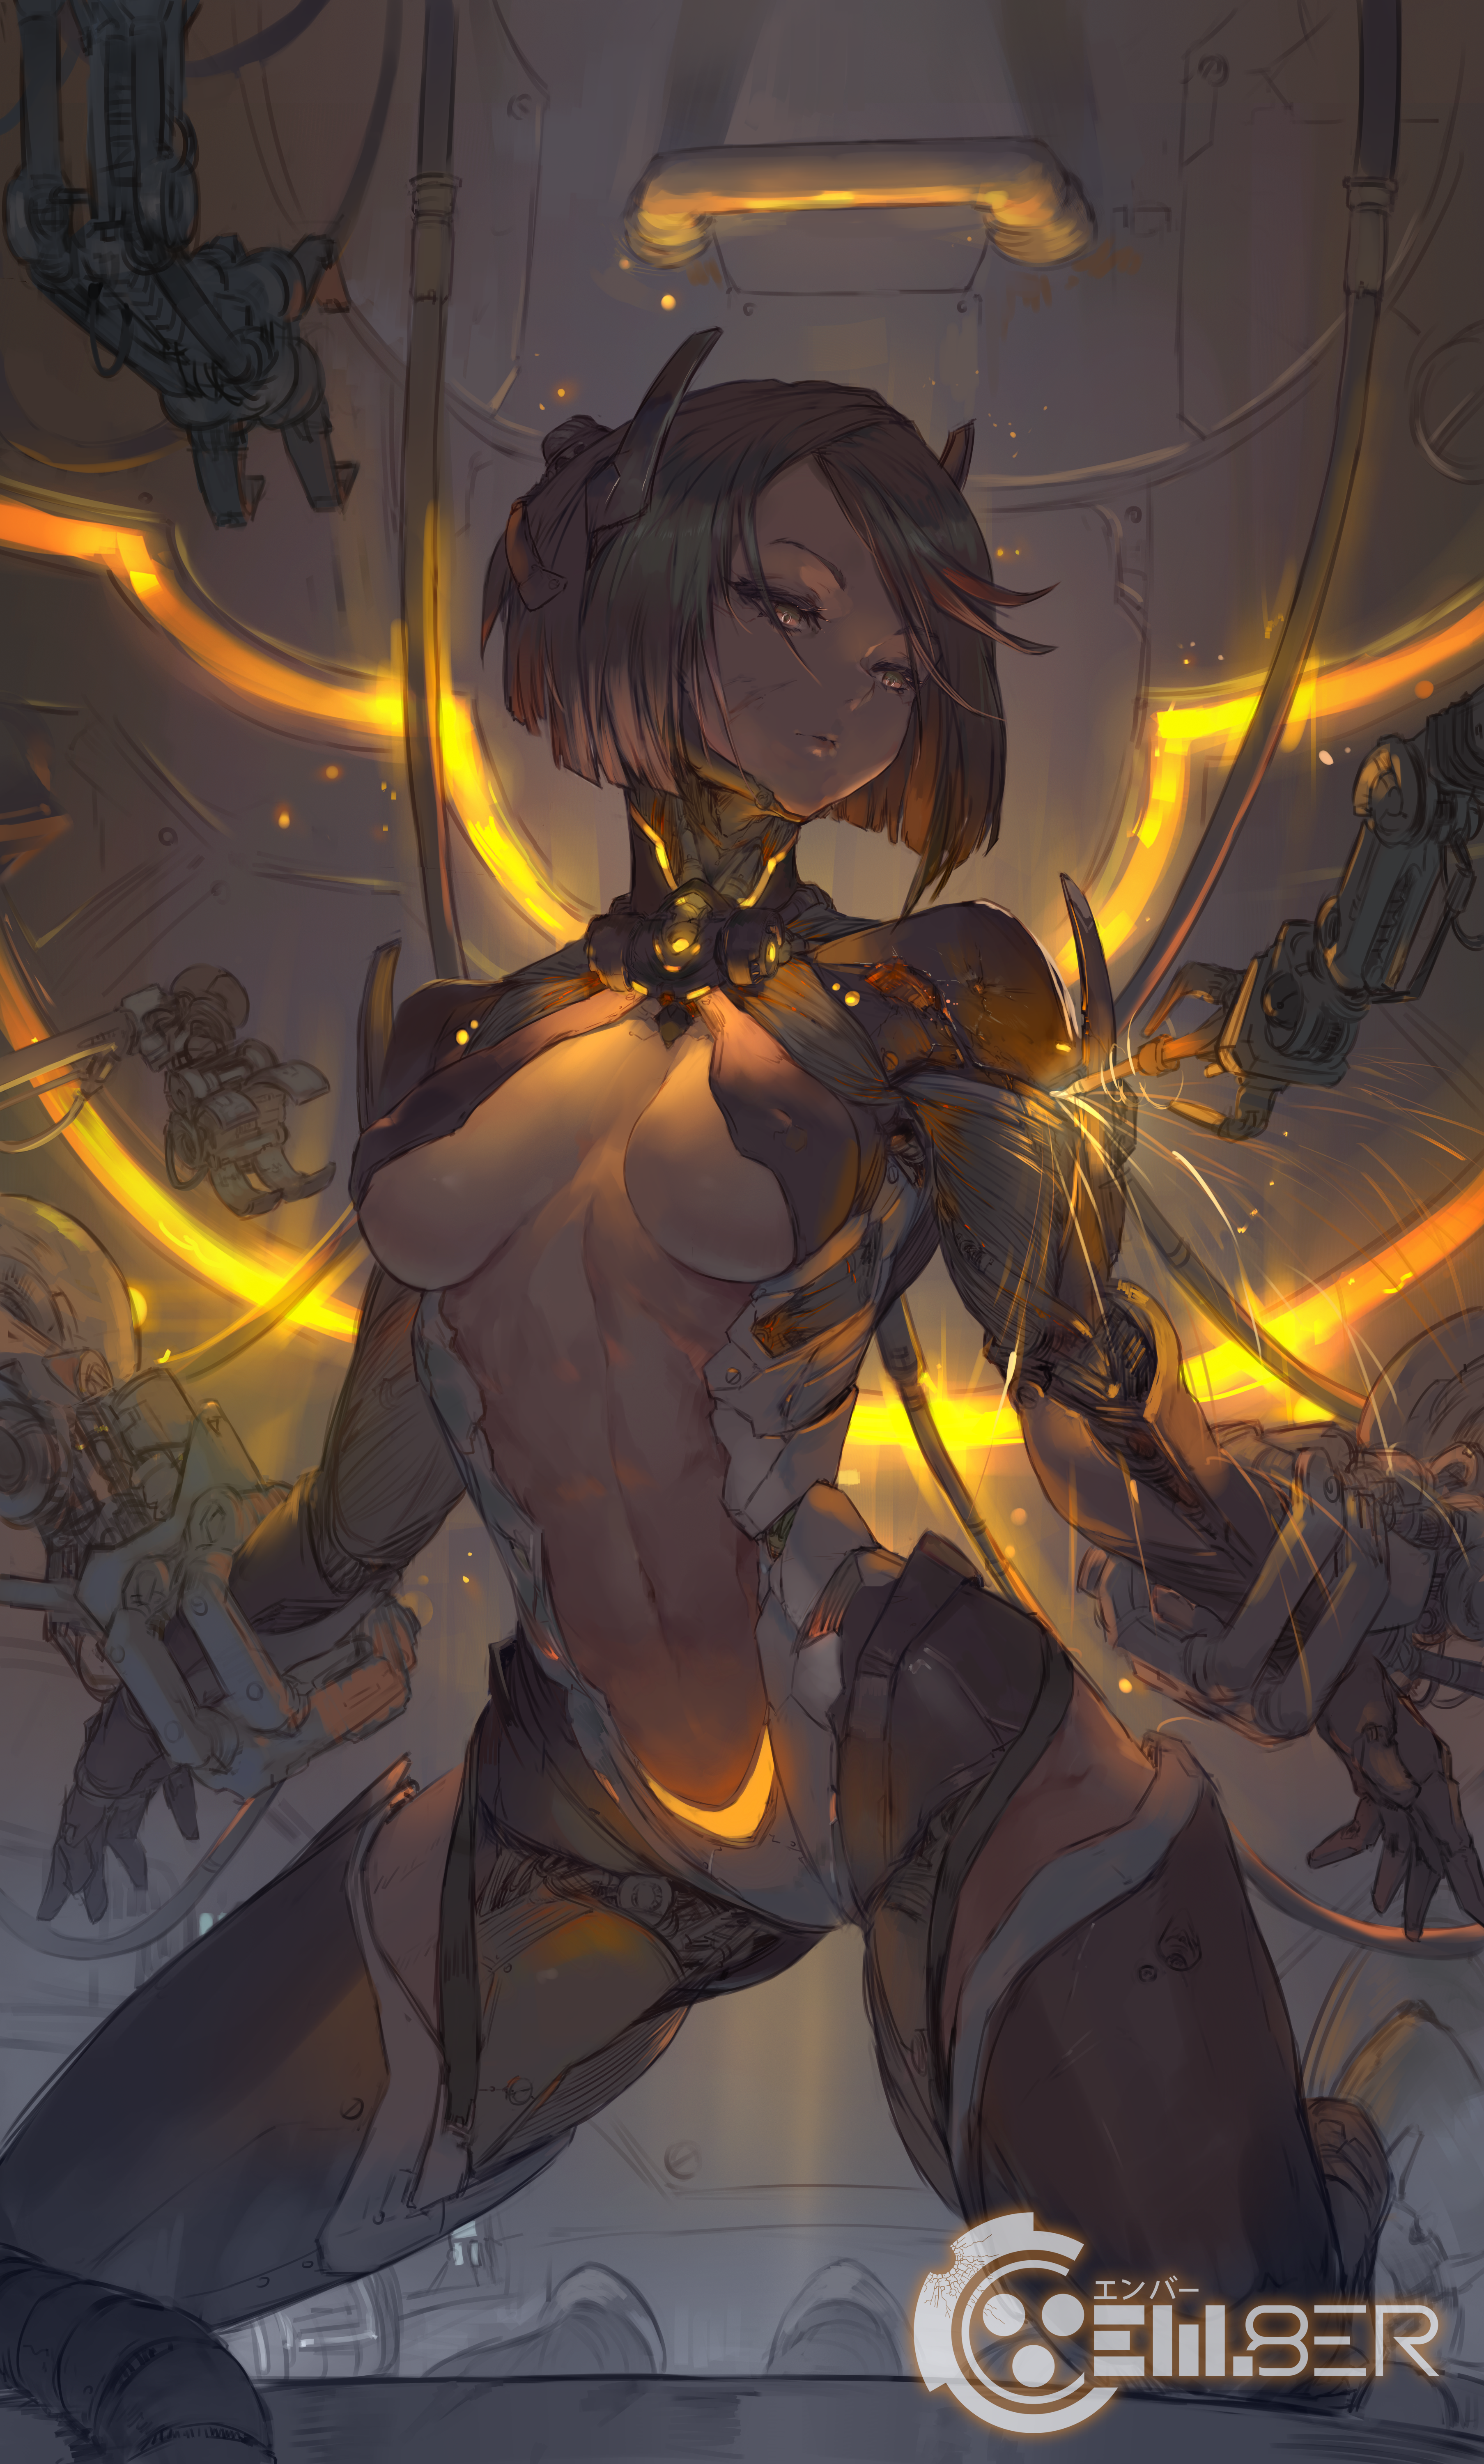 Anime 3614x6000 Em8ER original characters video games cleavage underboob belly cyborg science fiction sparks looking at viewer glowing fantasy girl 2D artwork drawing illustration Cutesexyrobutts